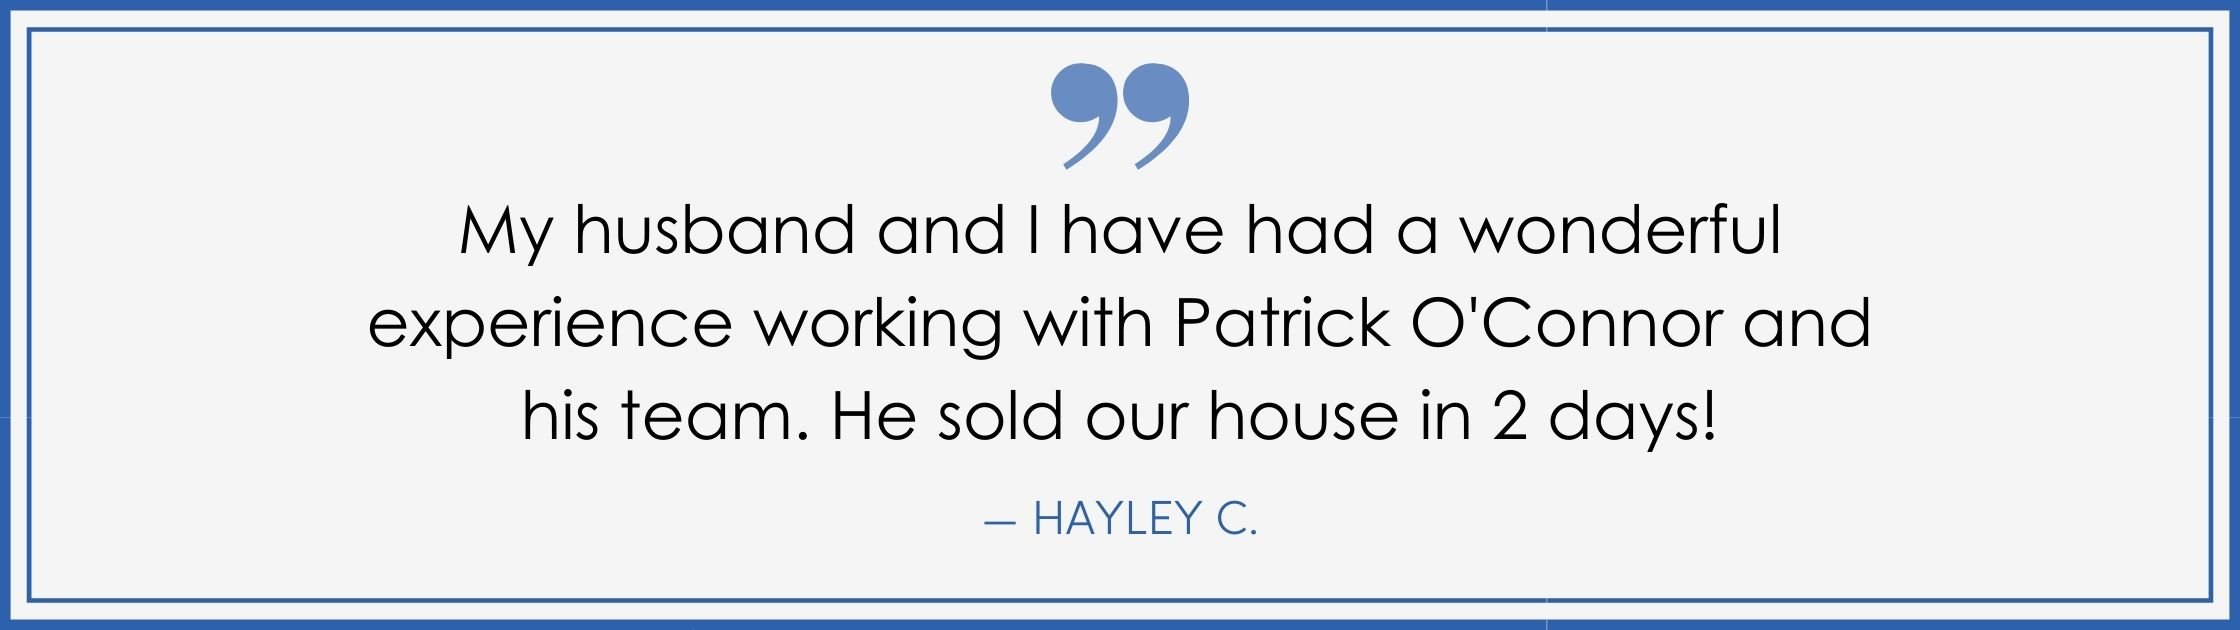 “My husband and I have had a wonderful experience working with Patrick O’Connor and his team. He sold our house in 2 days!” –Hayley C. (Copy) (Copy)